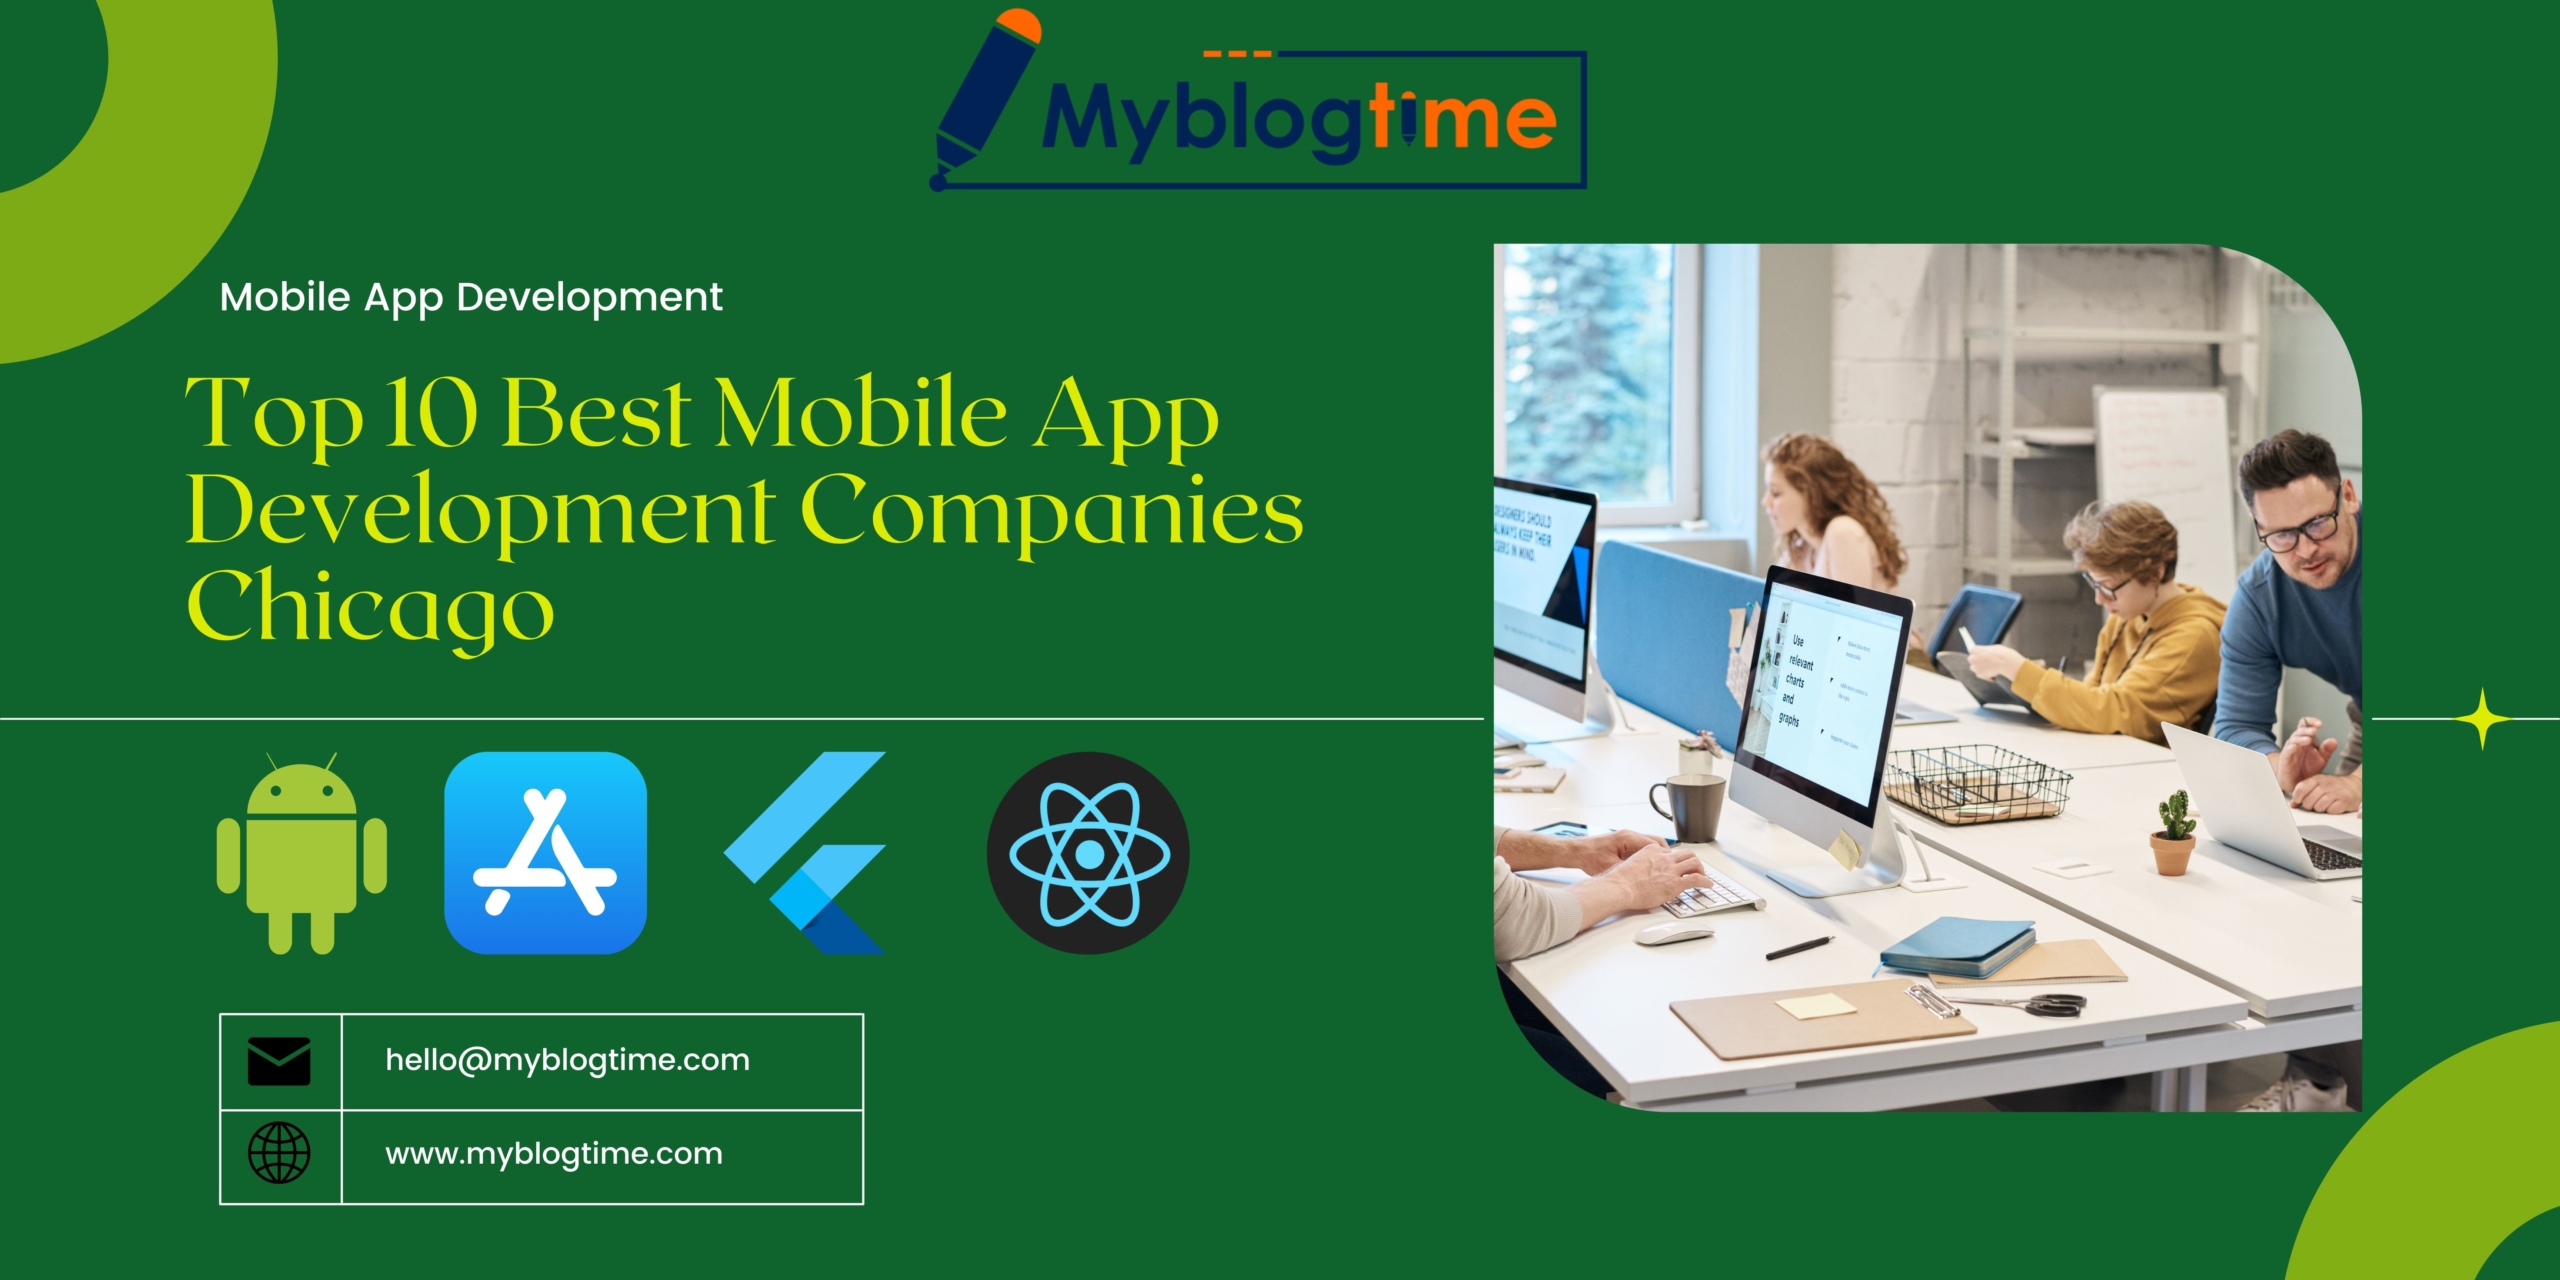 Top 10 Best Mobile App Development Companies Chicago - My Blog Time